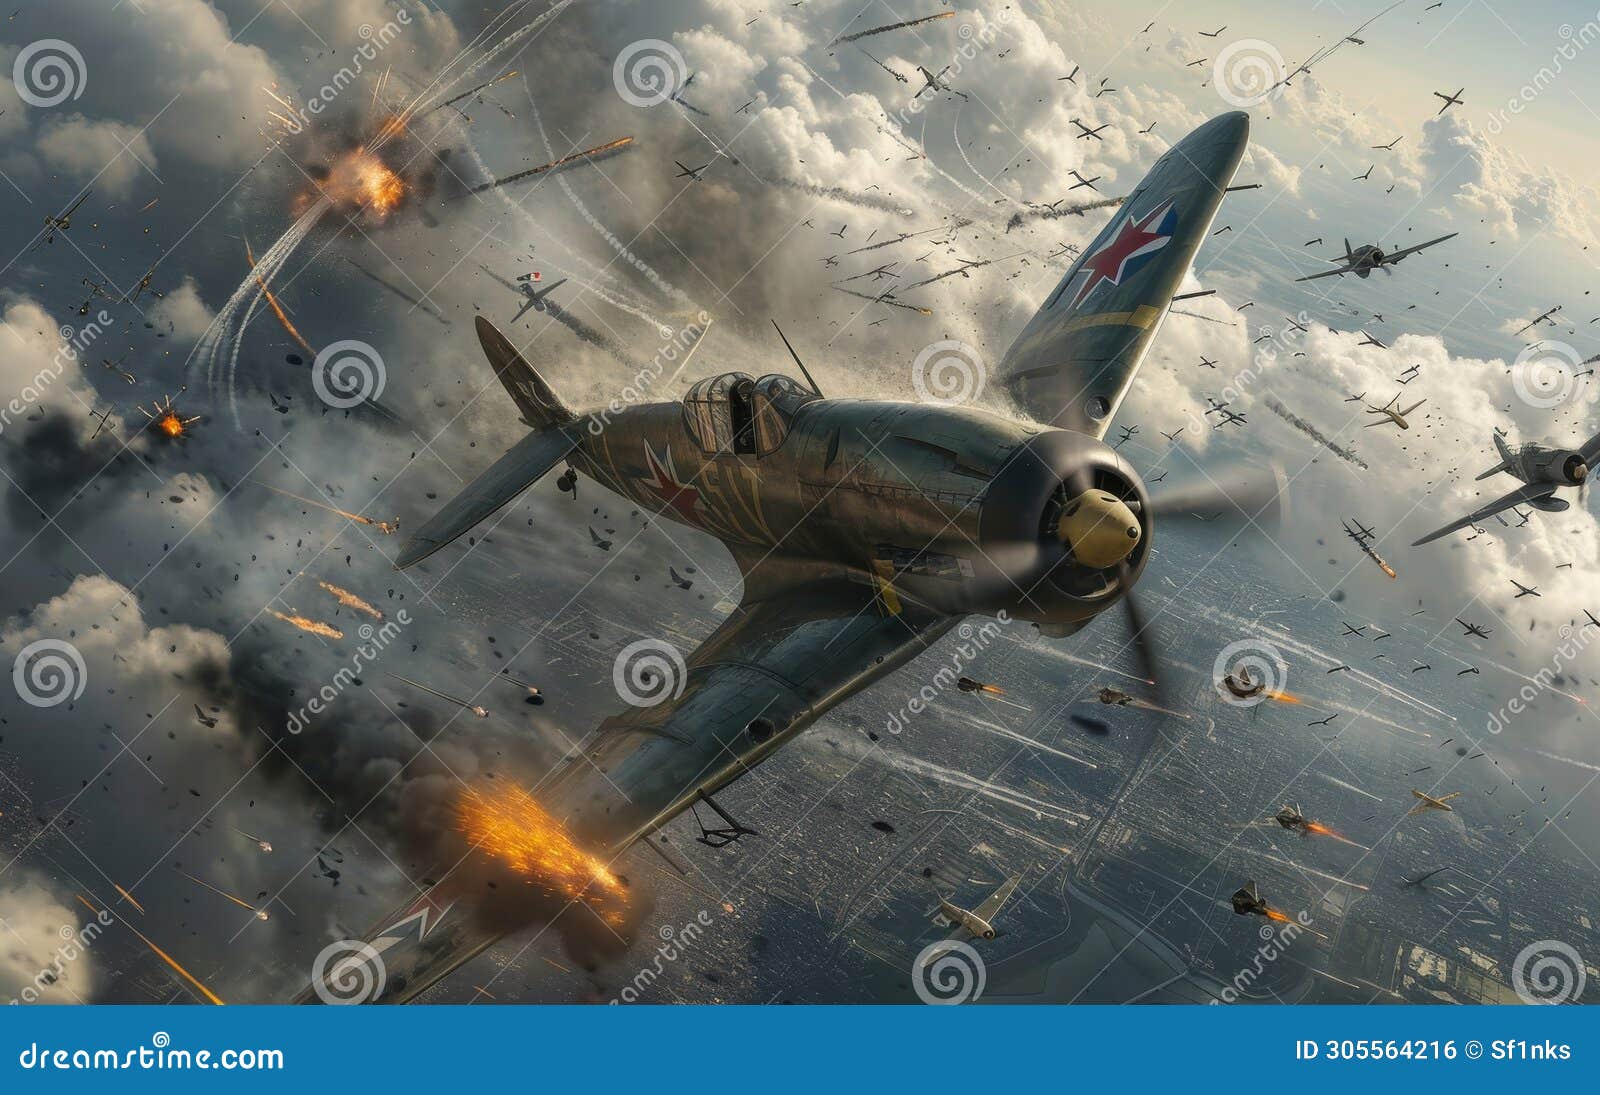 a dramatic scene of vintage warplanes in an aerial battle amidst clouds, with explosions and gunfire lighting up the sky